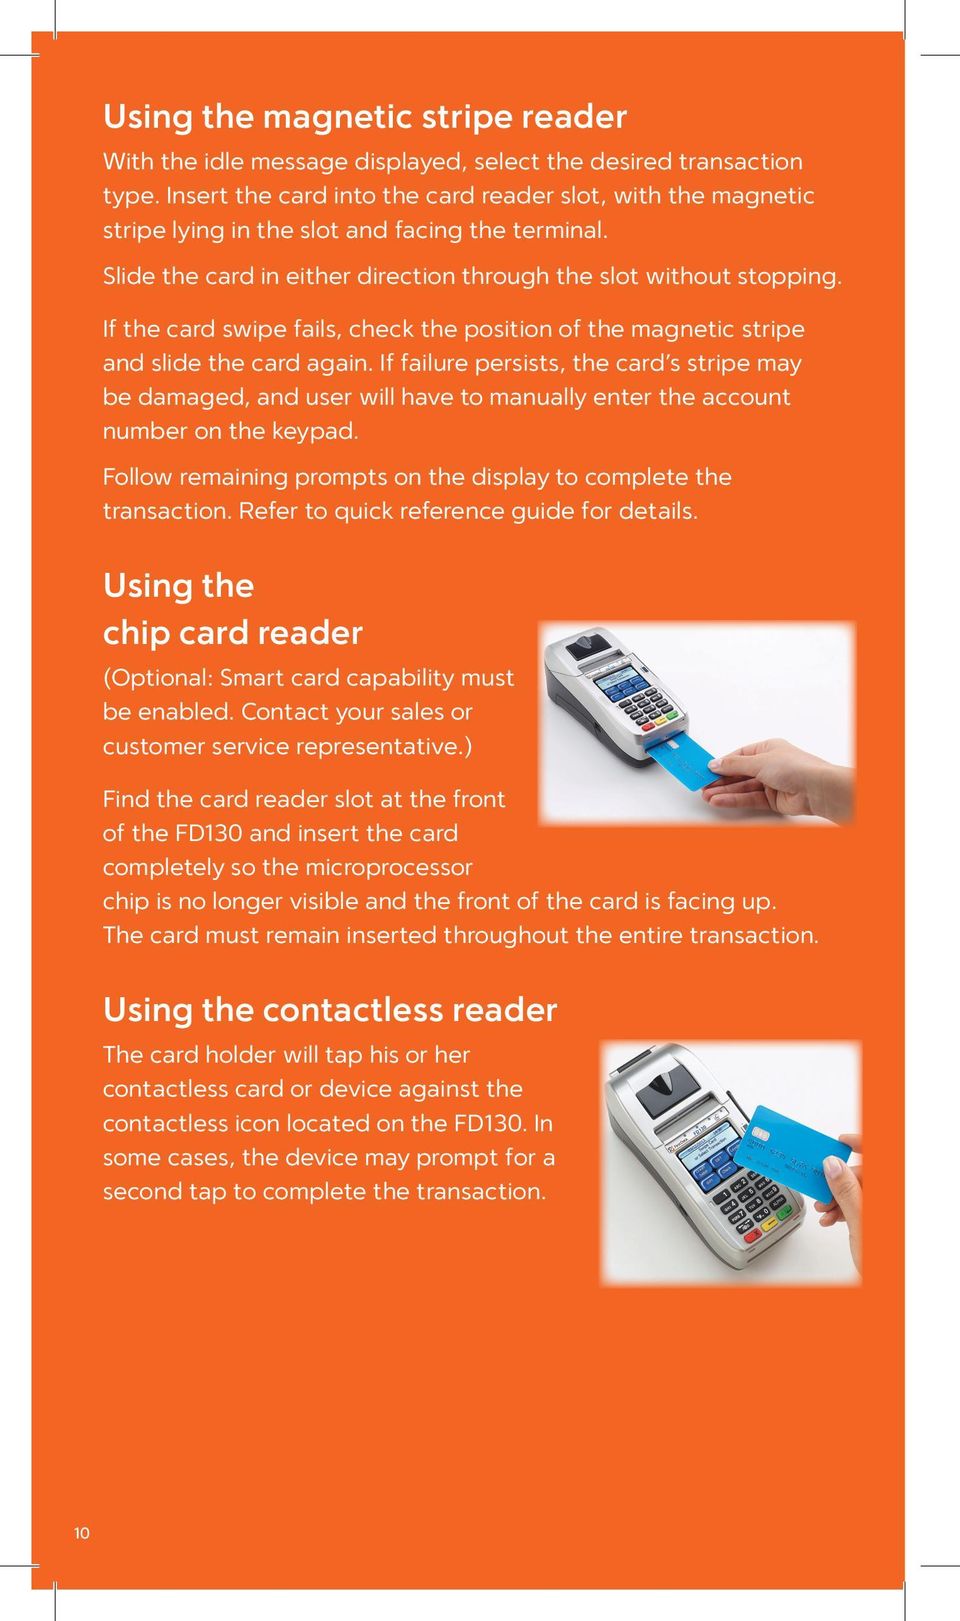 If the card swipe fails, check the position of the magnetic stripe and slide the card again.